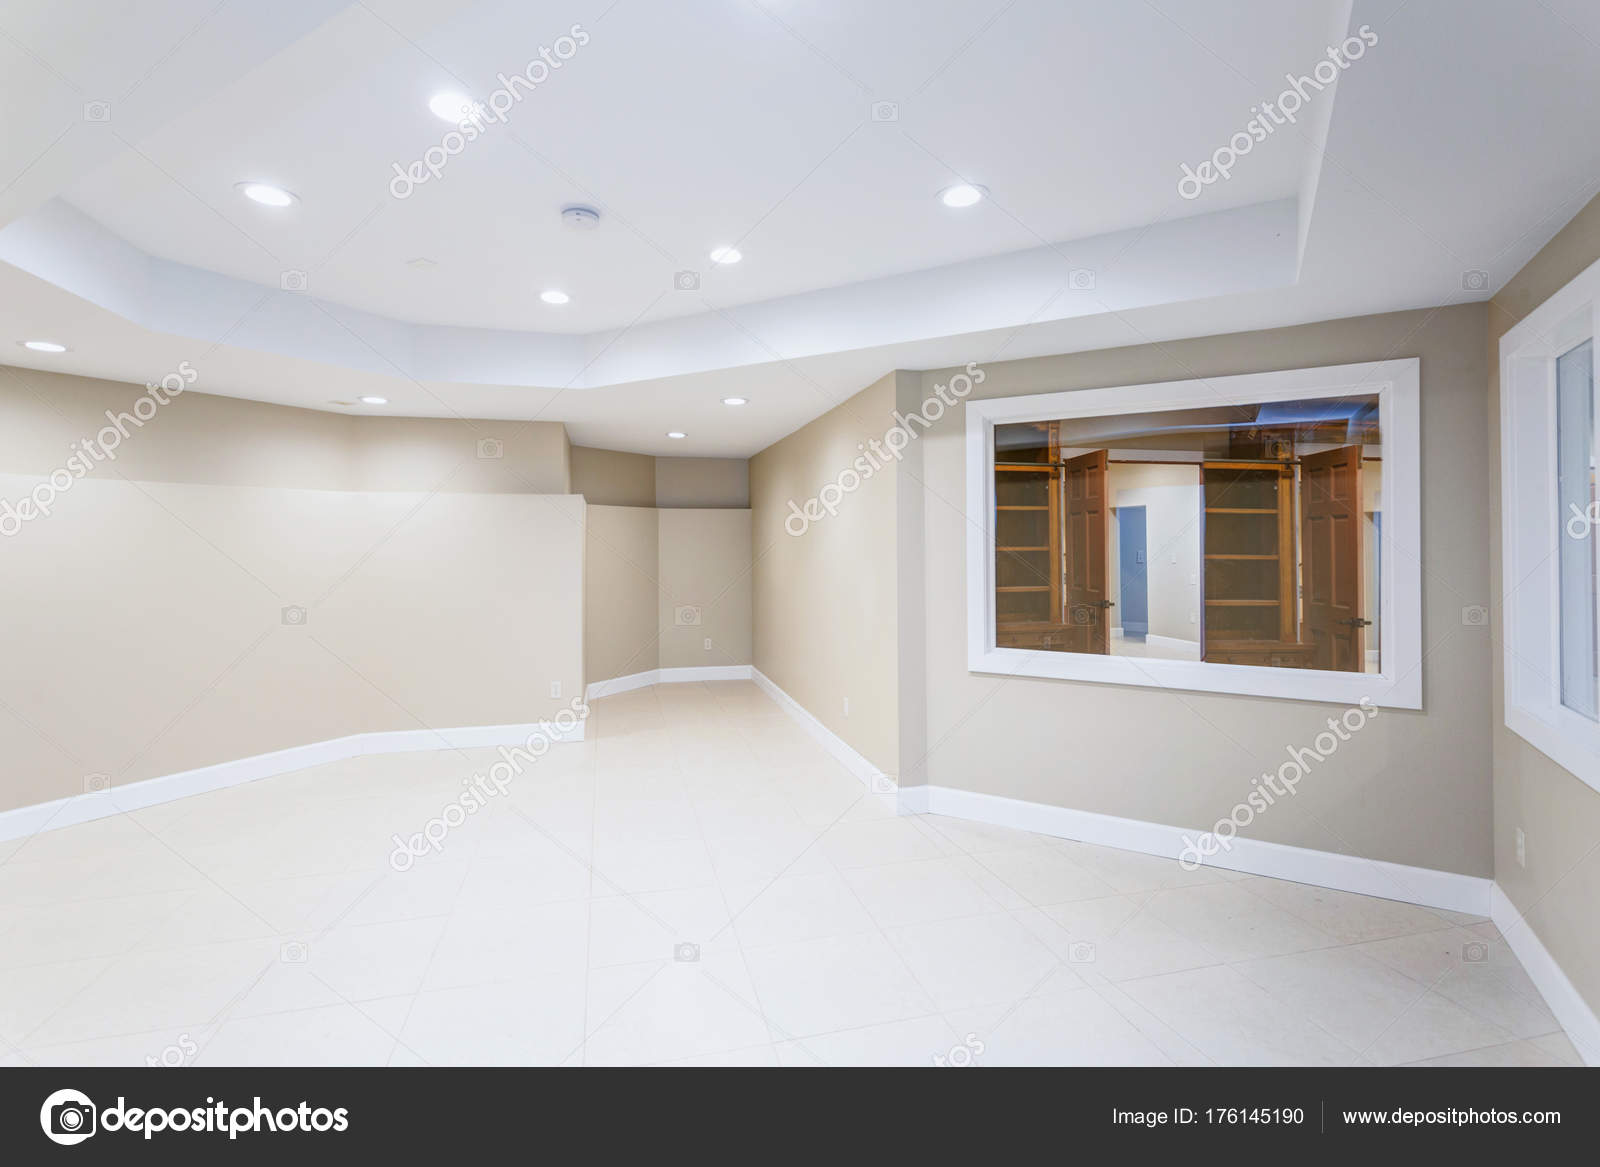 Images Coffered Tray Ceiling Light Empty Basement Room With